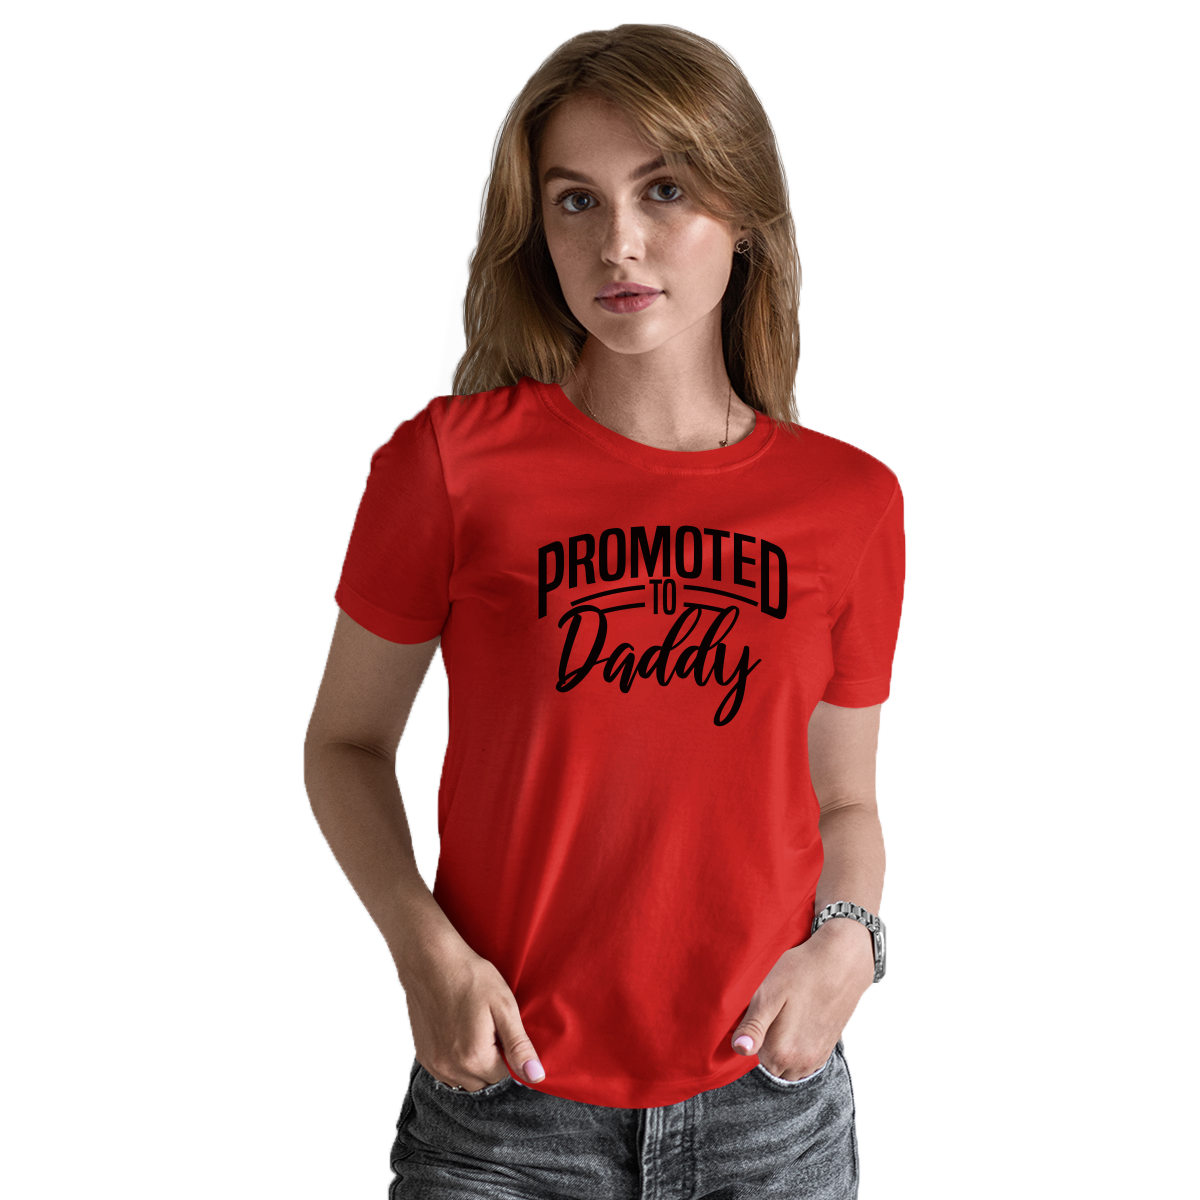 Promoted to daddy Women's T-shirt | Red